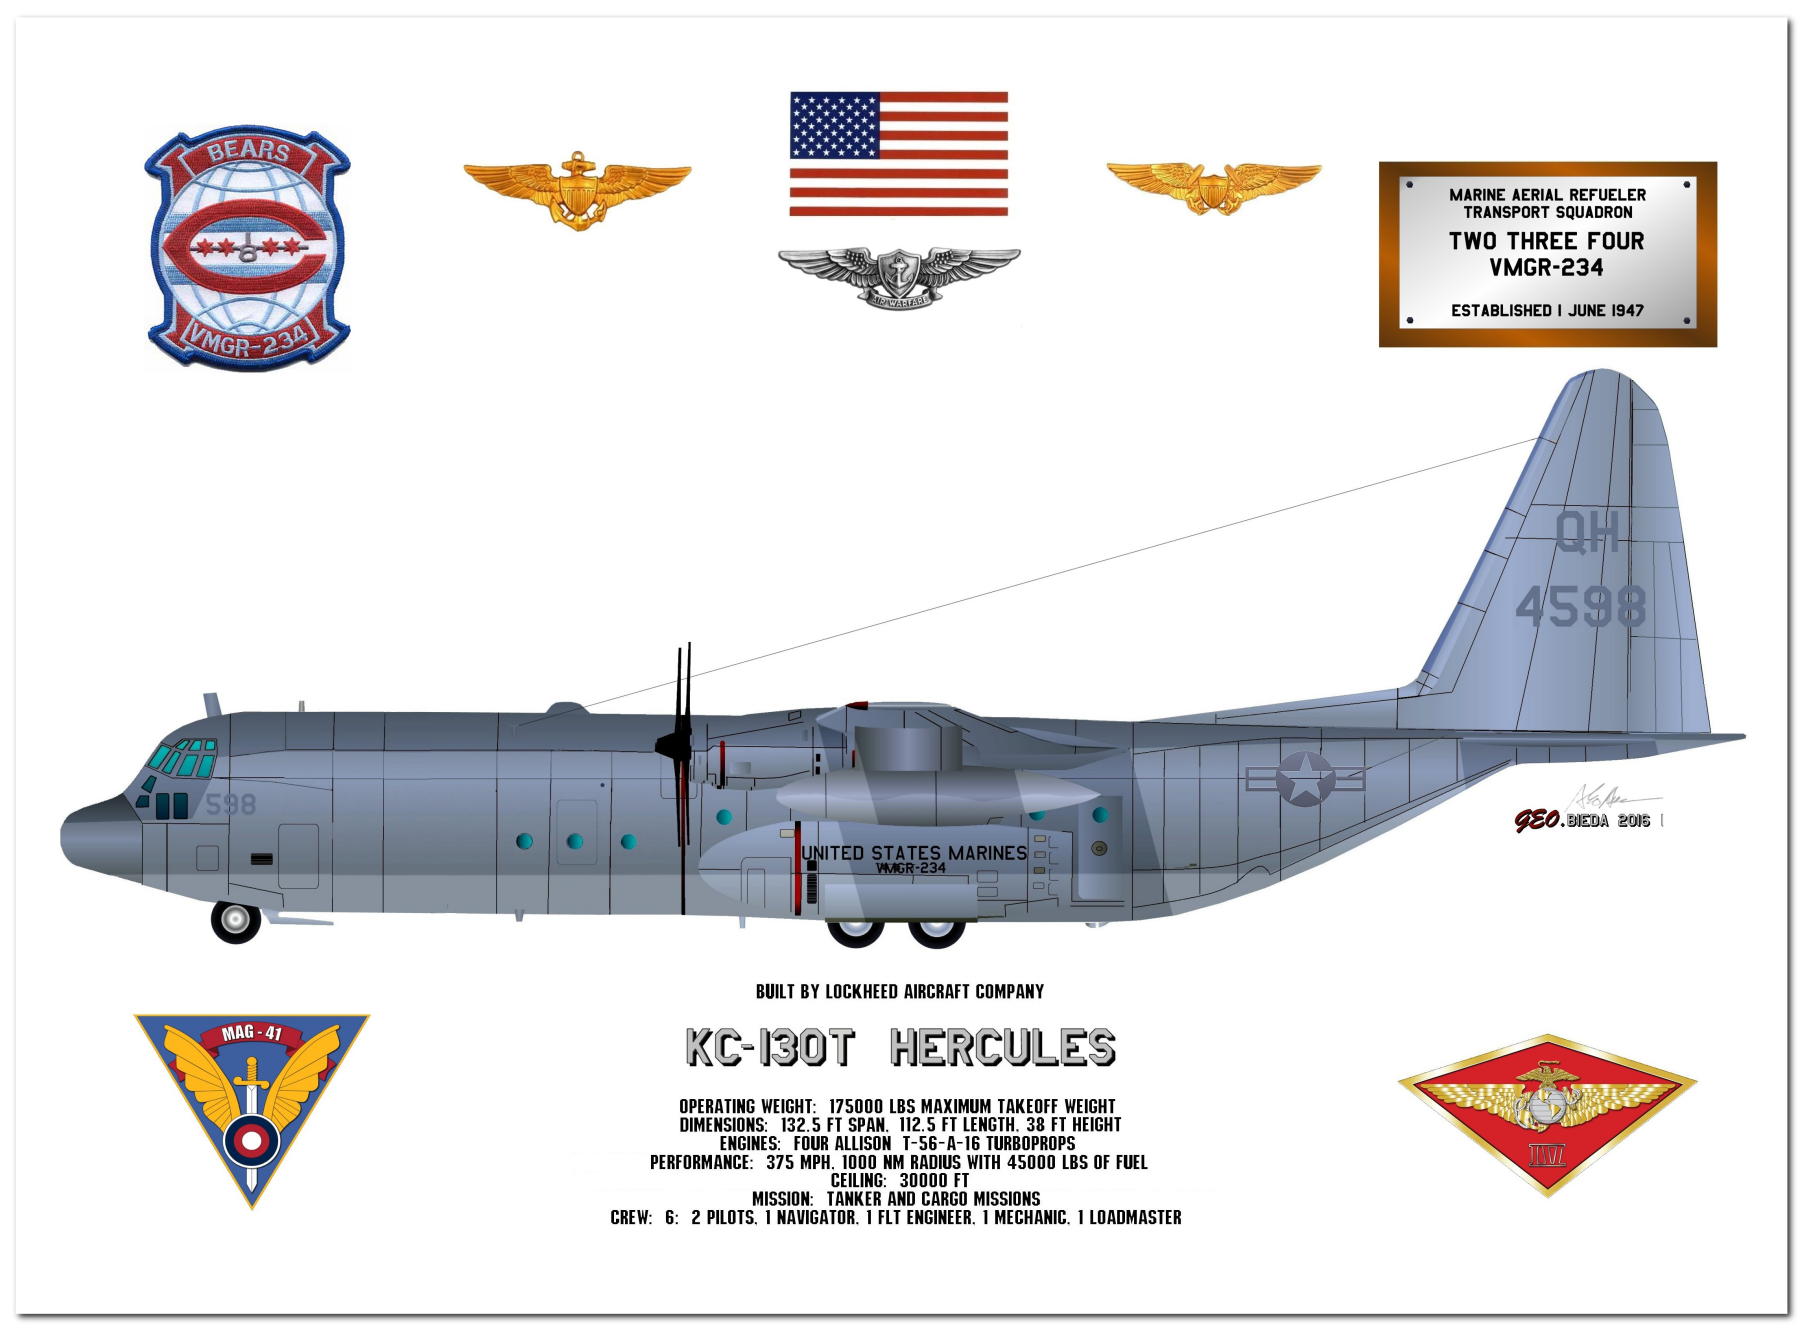 Profile Drawings of the United States Marine Corps KC-130 Hercules by George Bieda